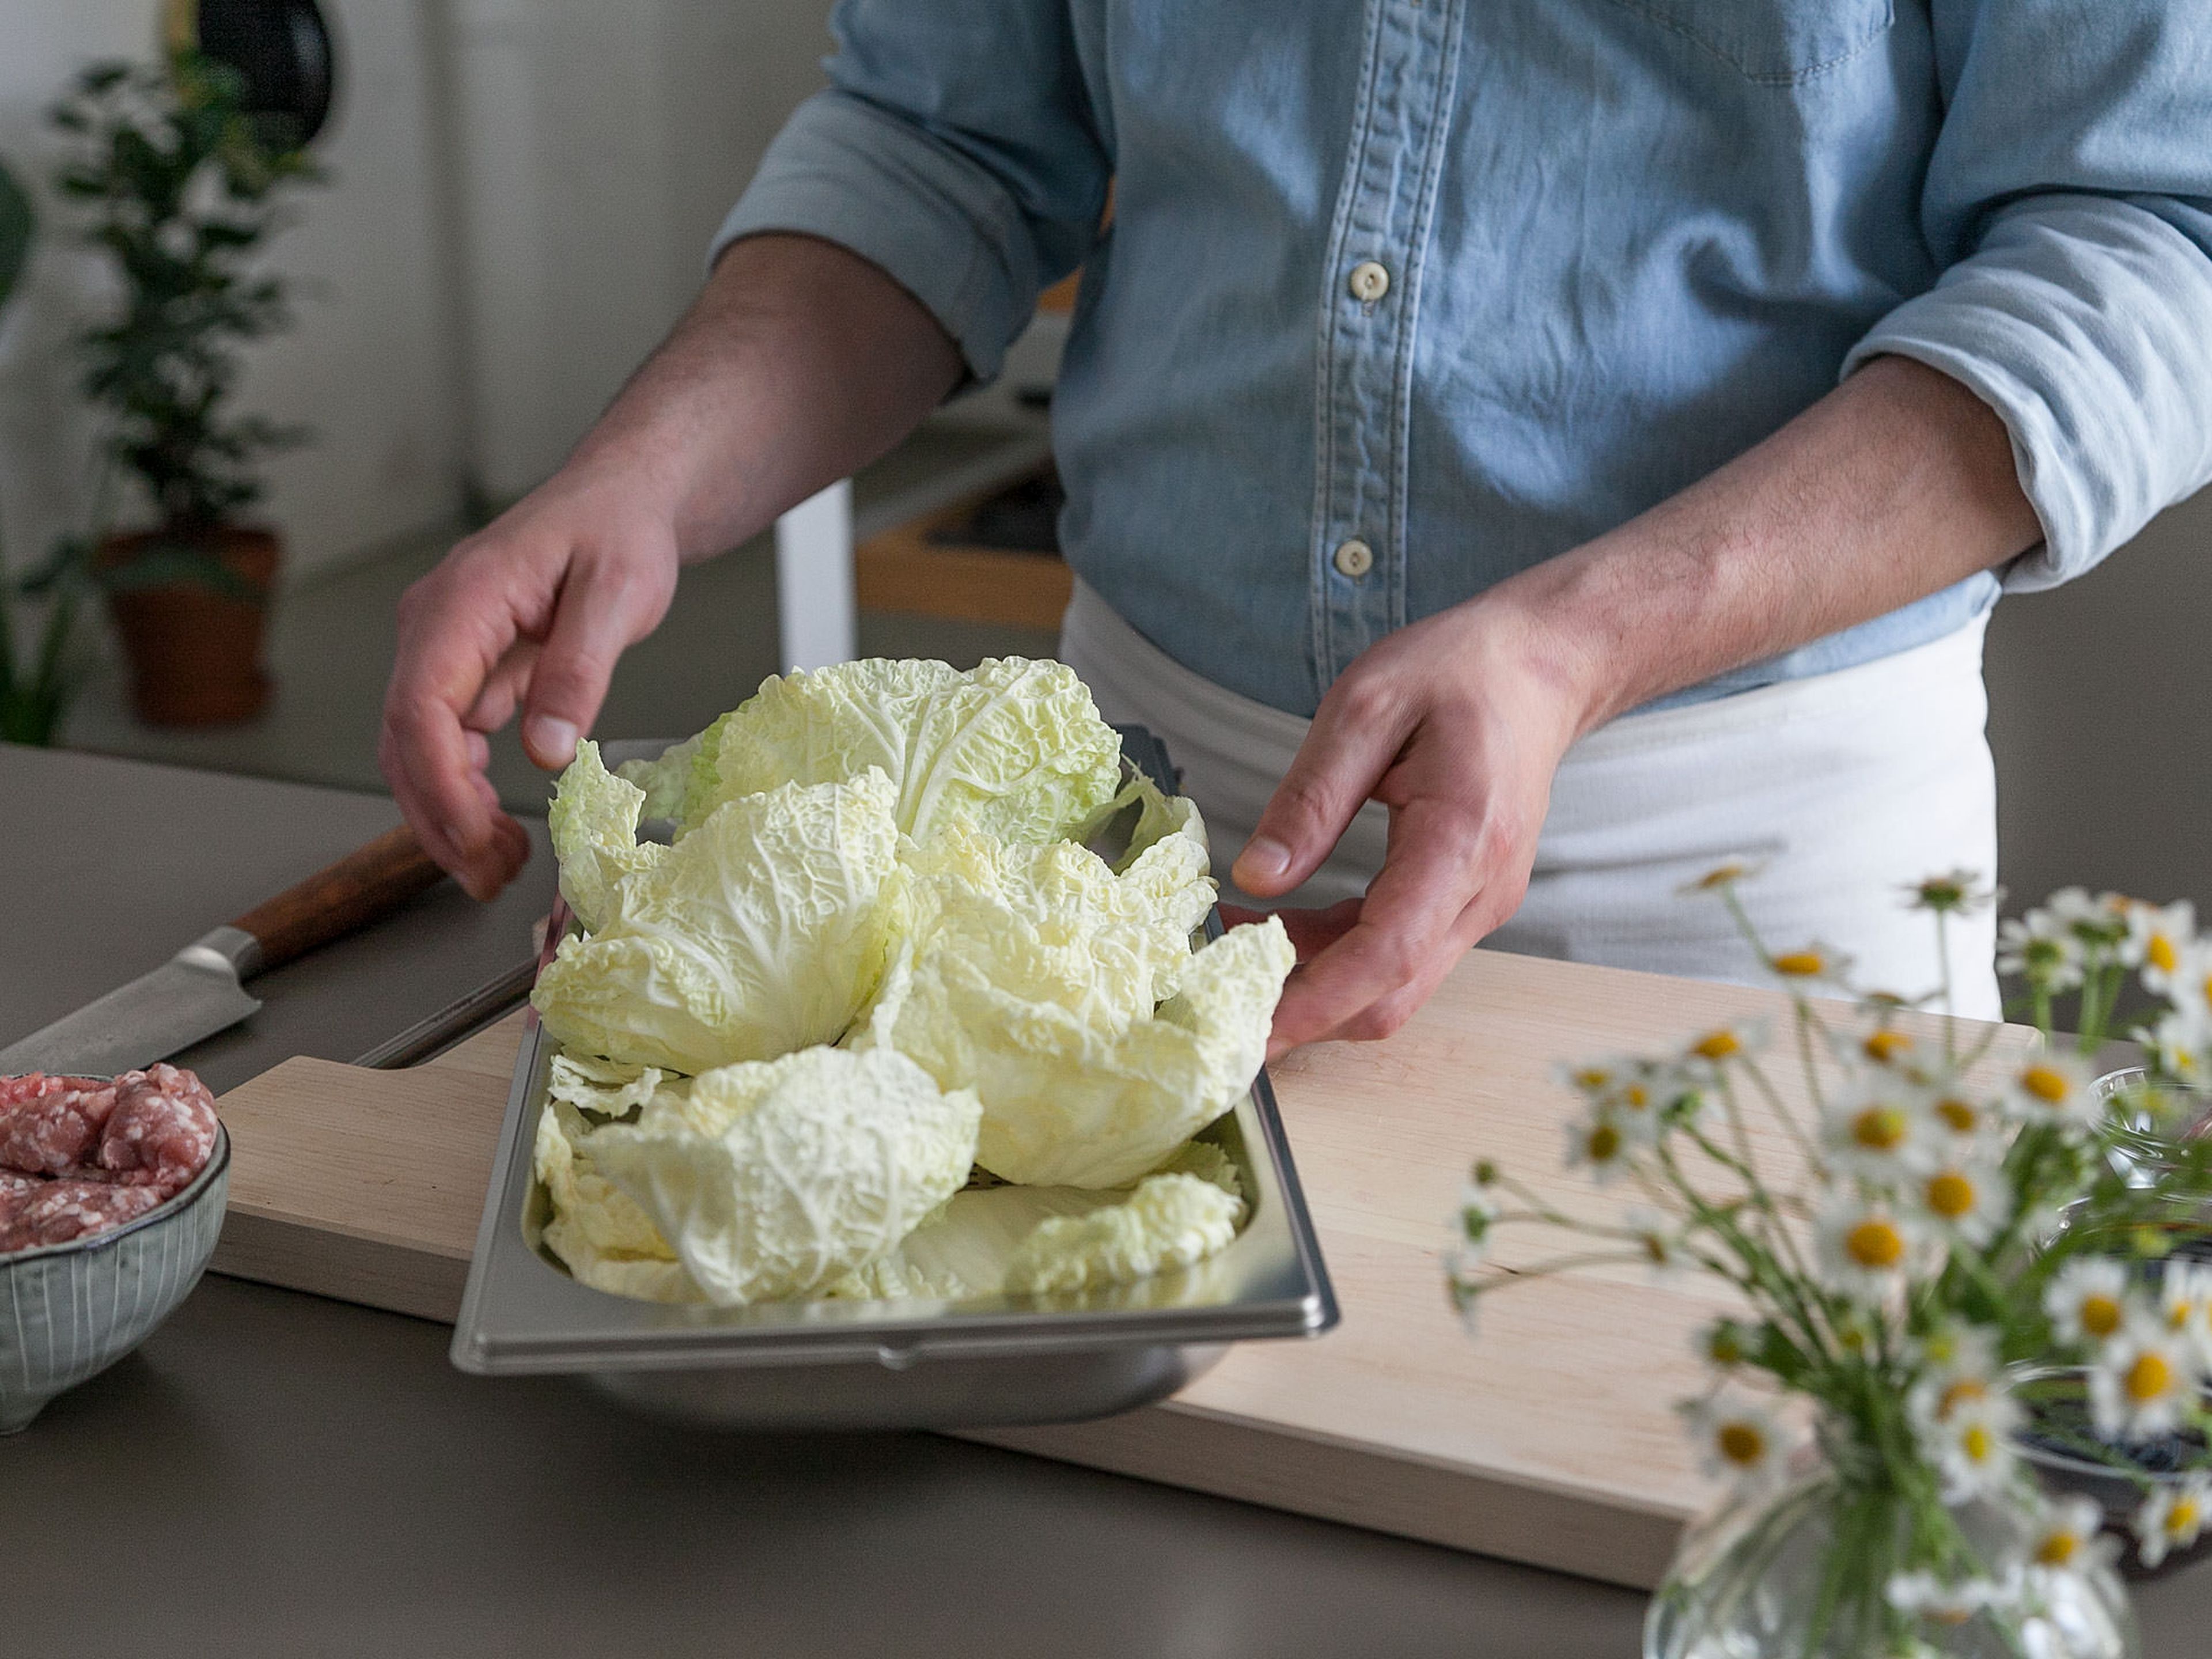 Blanche whole Chinese cabbage leaves in steam oven for approx. 1 min. Transfer to an ice bath-filled bowl directly afterwards.